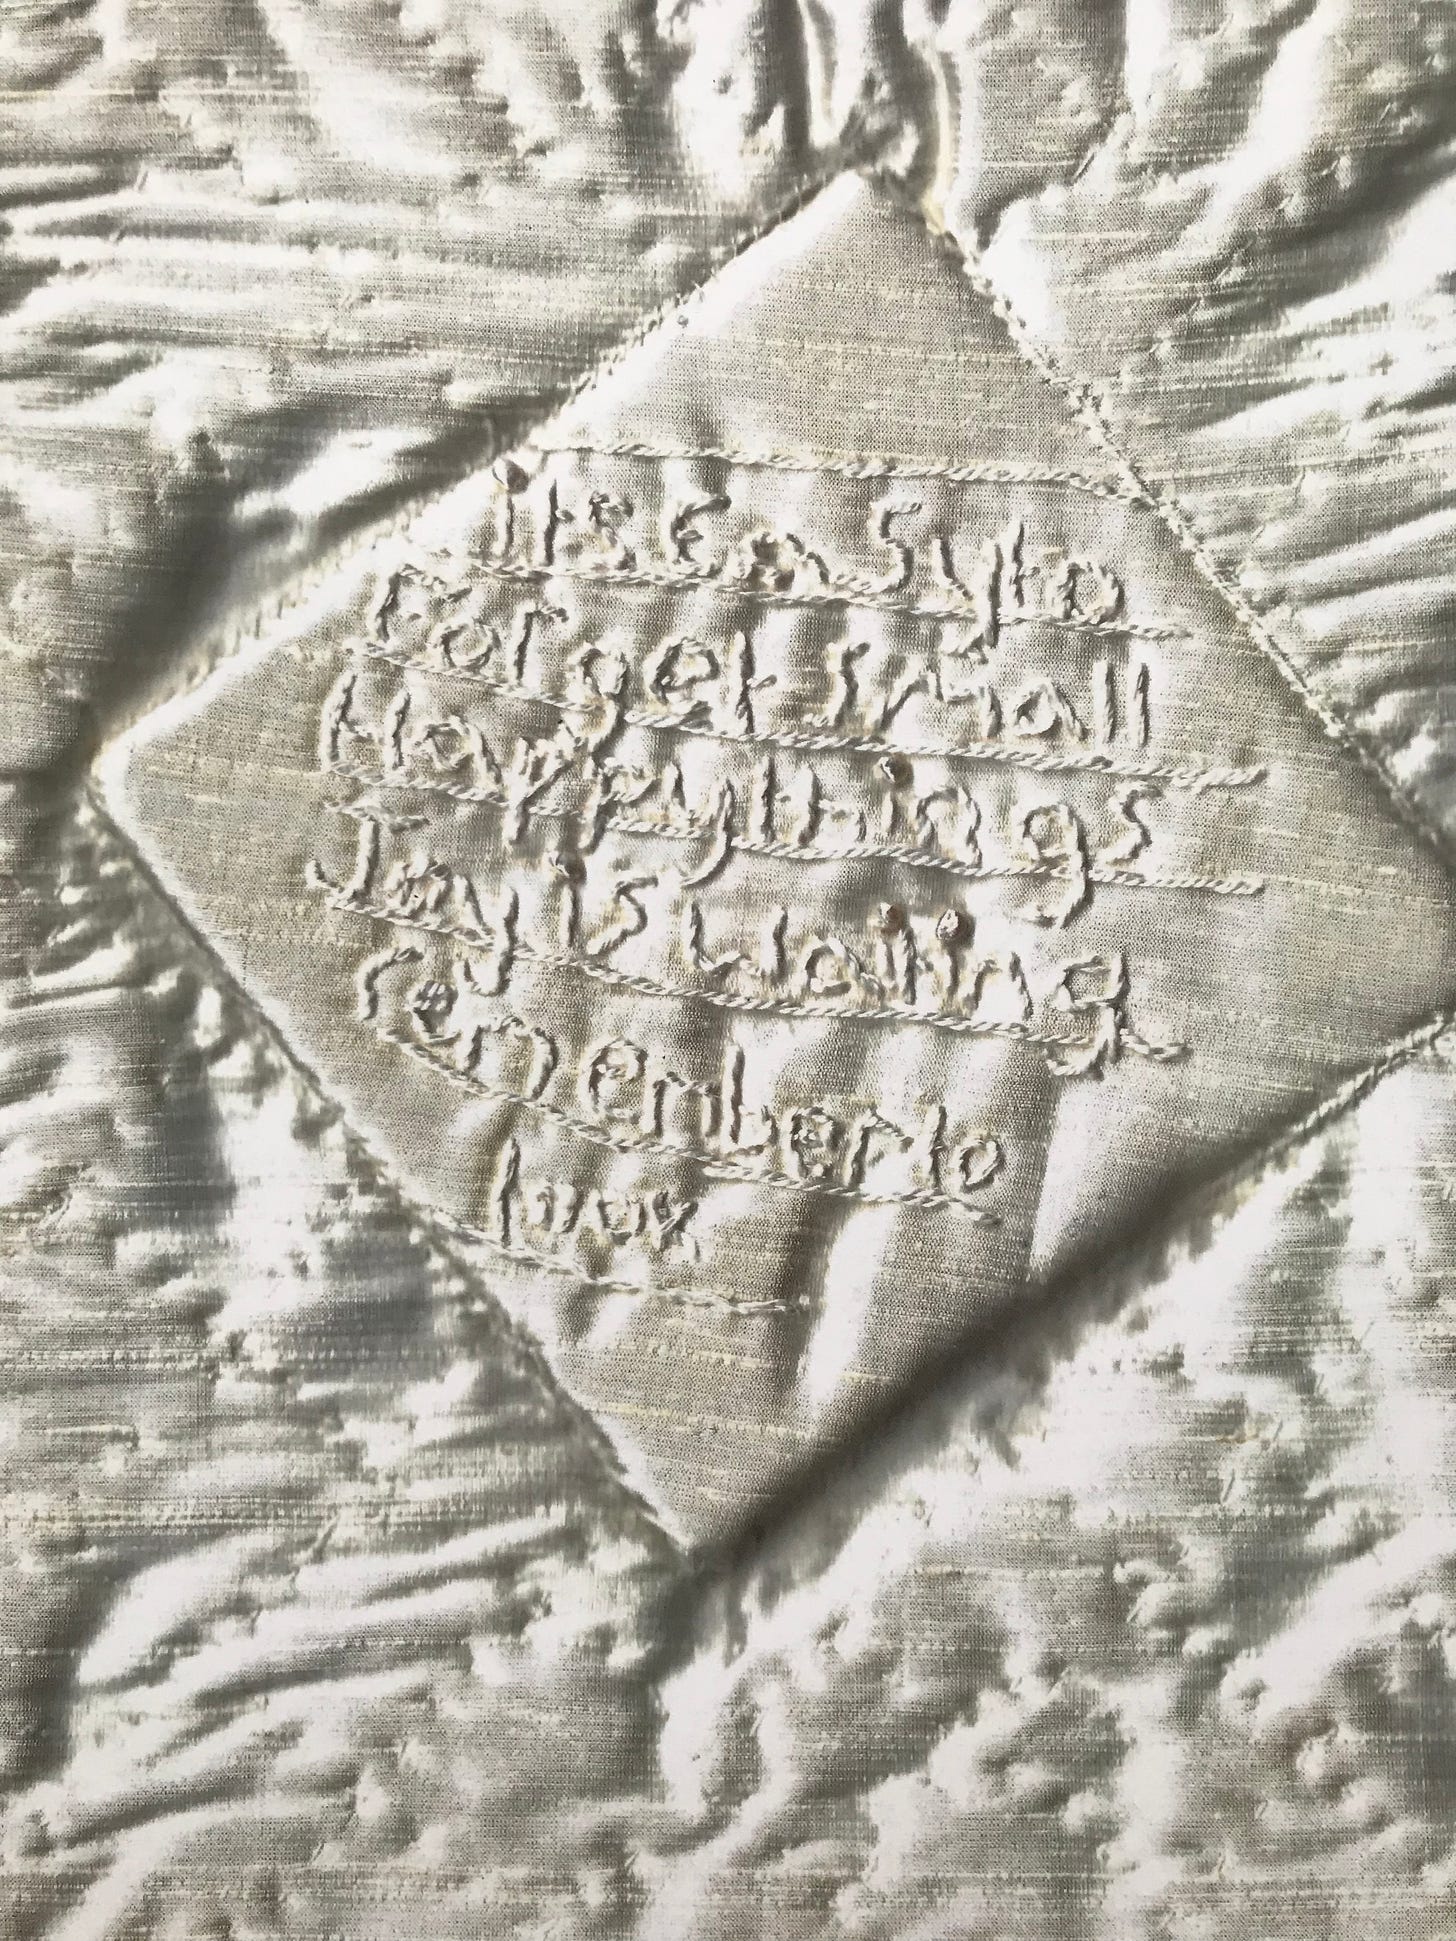 Book of Hours cover, image of quilted satin fabric with stitching in a diamond shape at the centre with the text "It’s easy to forget small happy things joy is waiting remember to look."  in hand stitch.